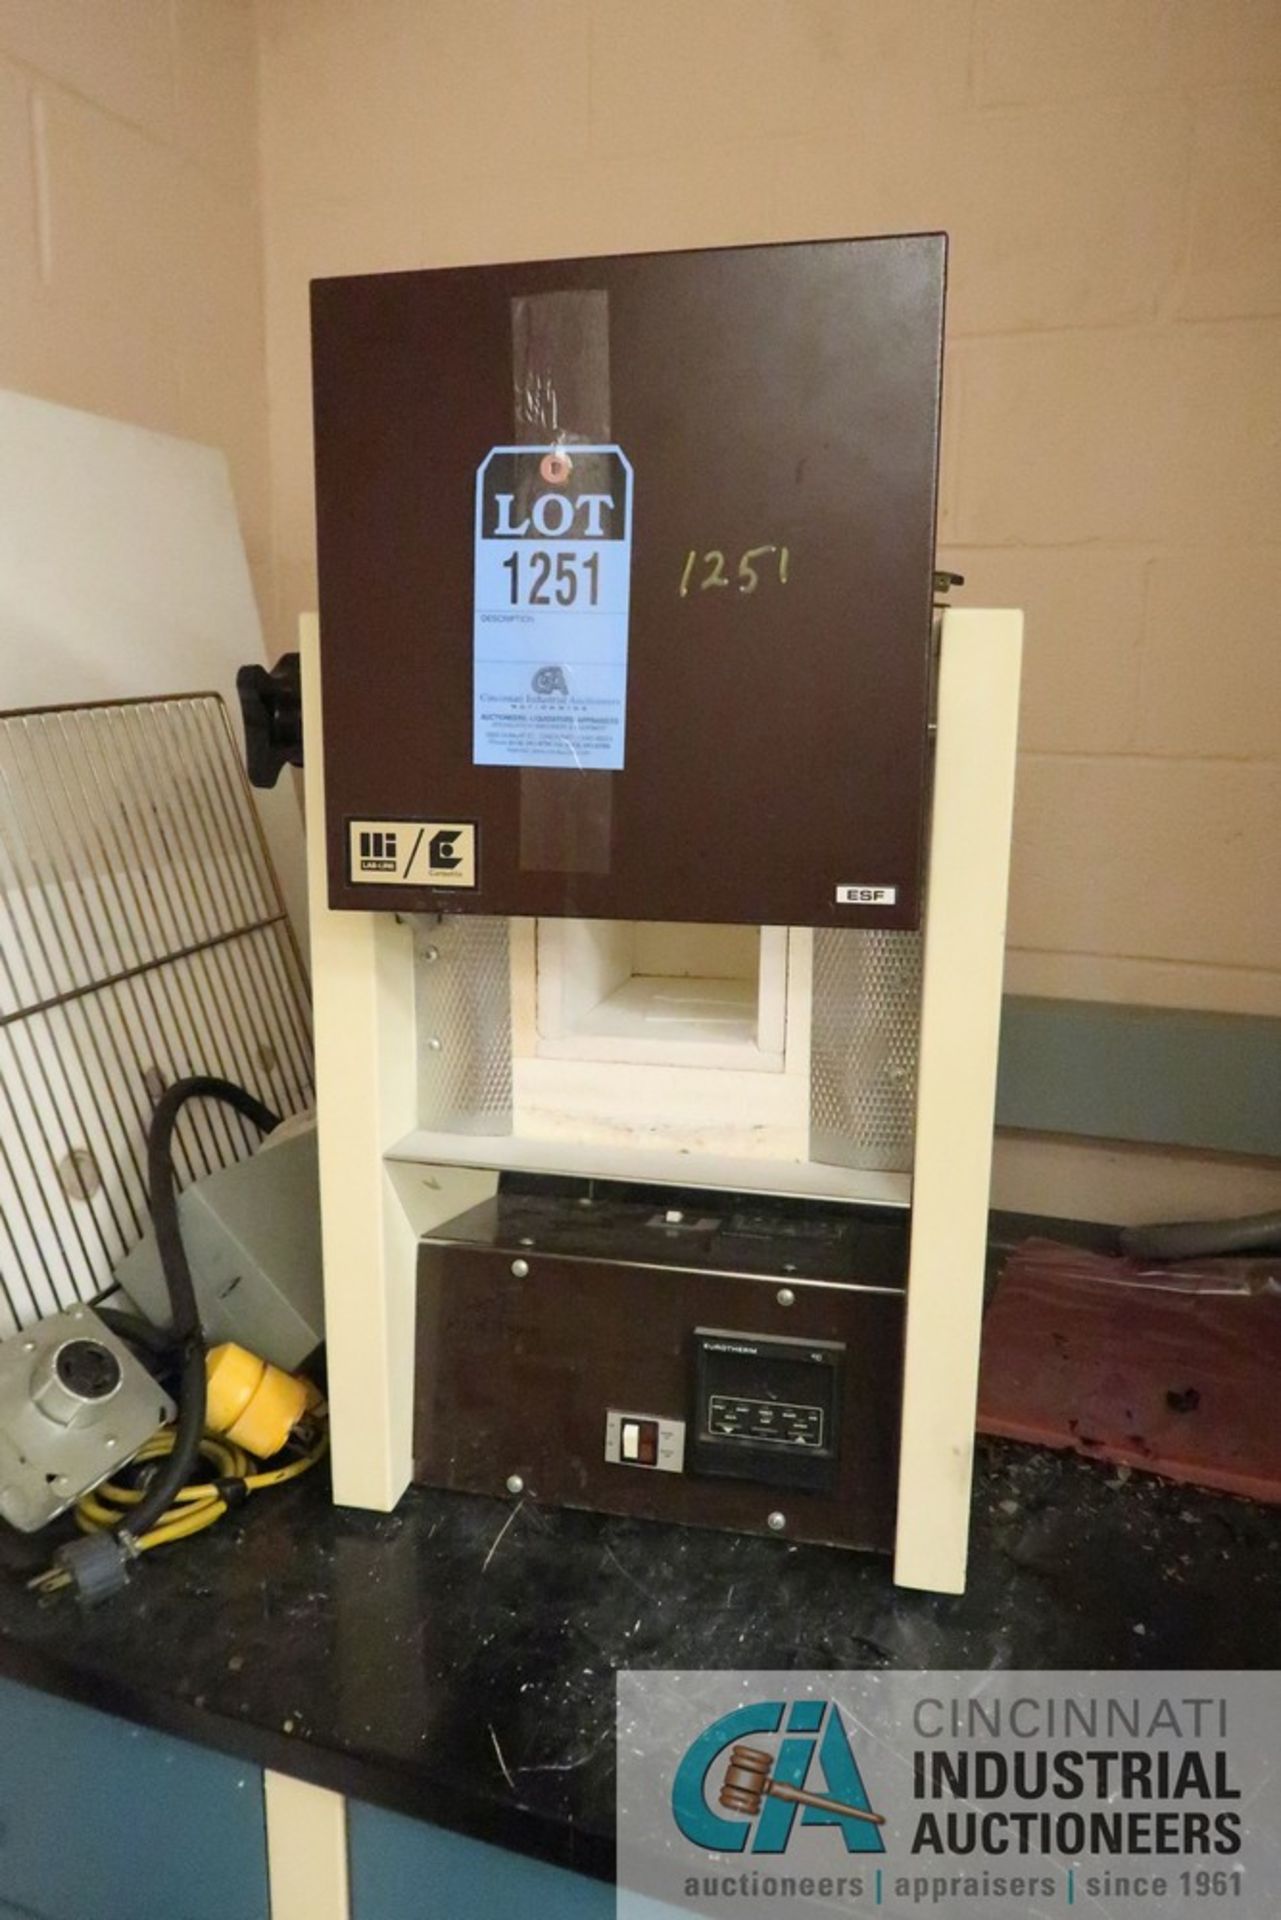 LAB-LINE MODEL 4230-3 OVEN, 5" X 4" X 8" CHAMBER (ROOM 4) - Located in the basement